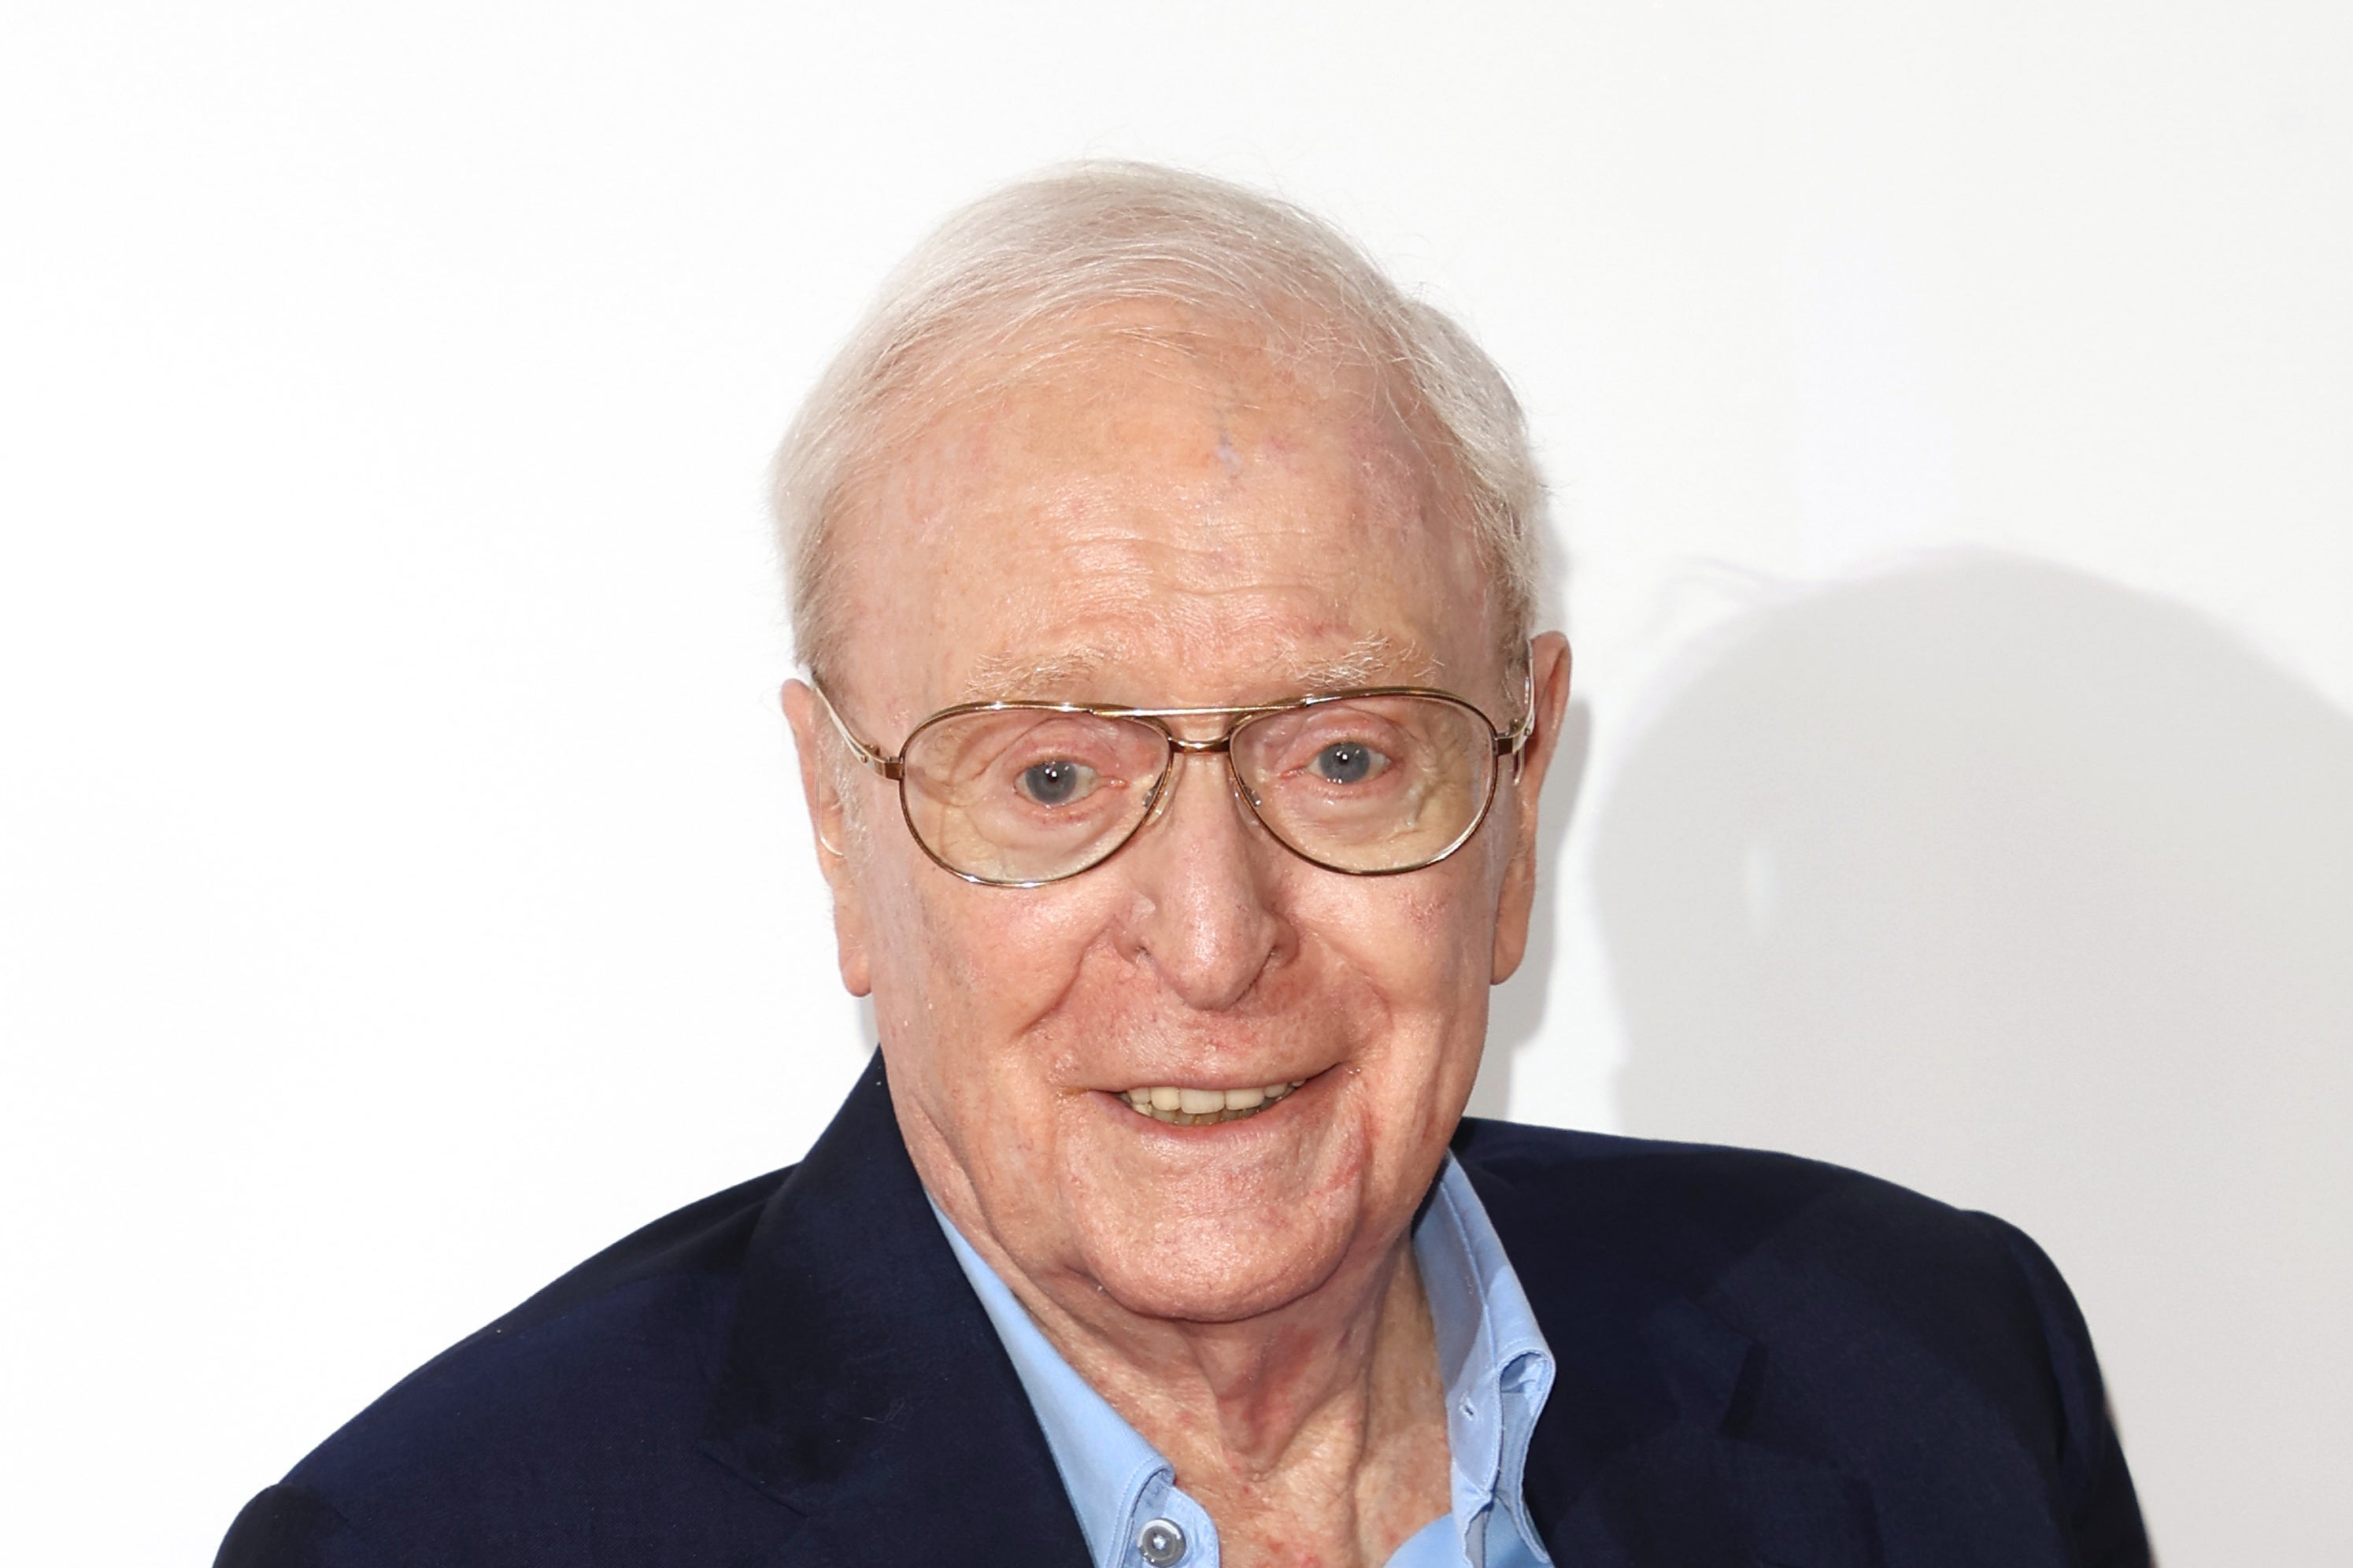 Michael Caine's 'Best Sellers' Has Something to Say About the